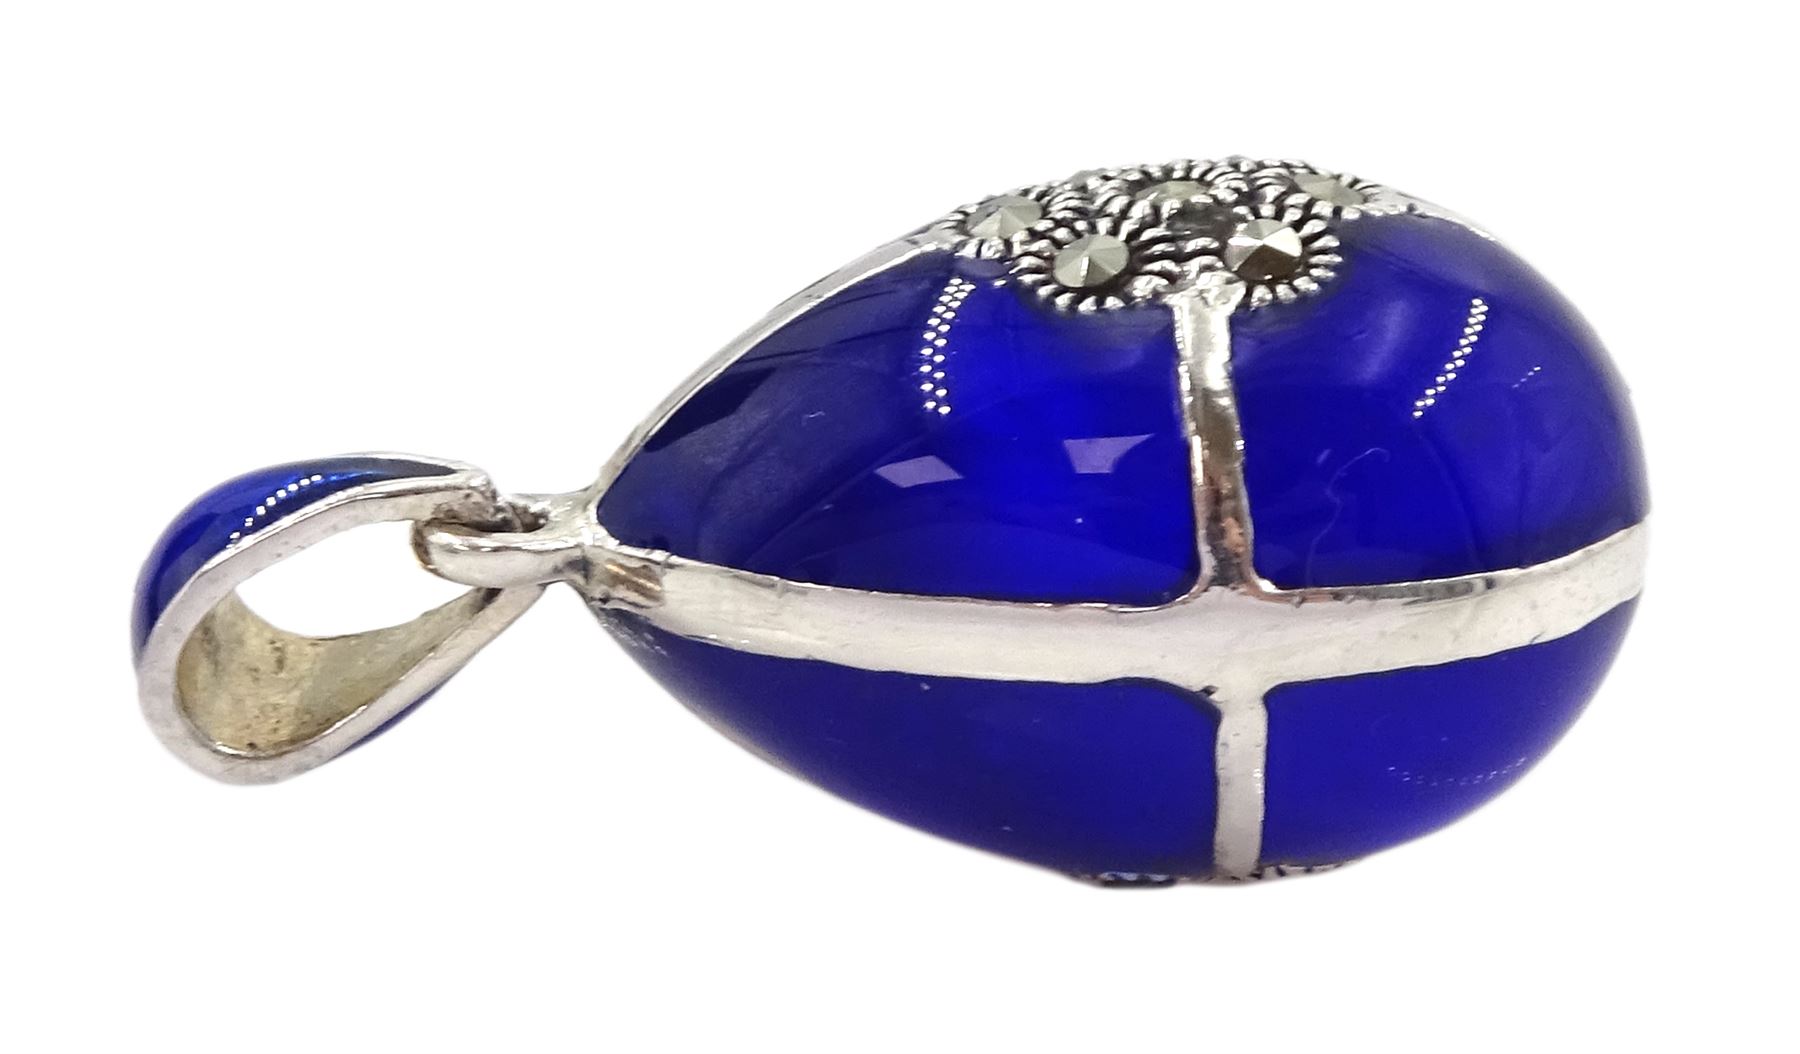 Silver blue enamel and marcasite egg pendant - Image 2 of 2